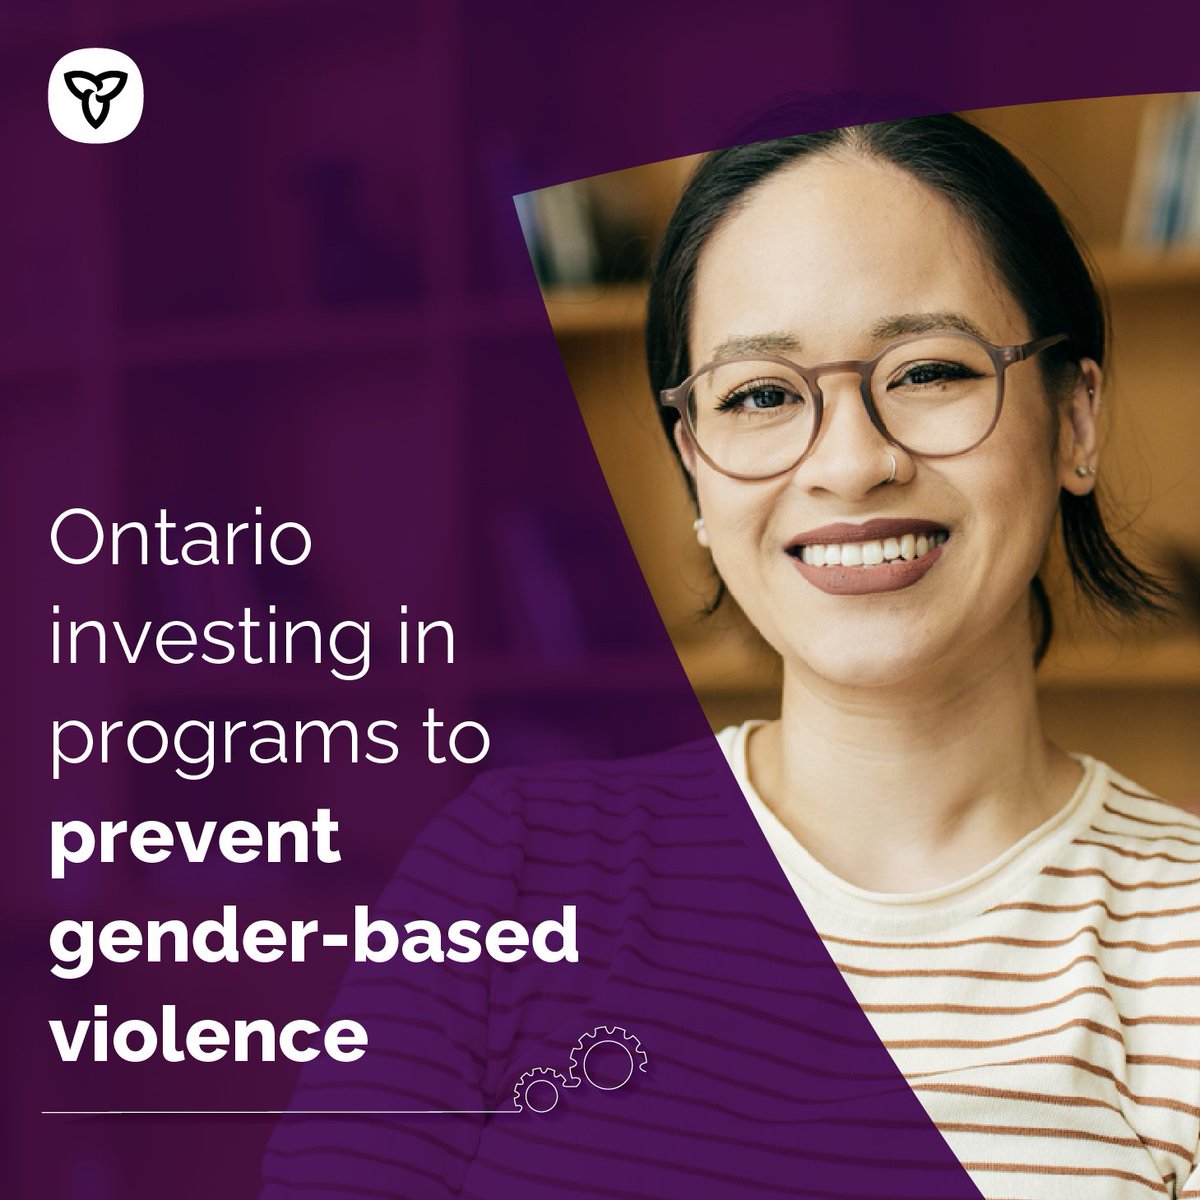 When women succeed, Ontario succeeds. That’s why we’re investing in programs and critical supports to prevent and address #GenderBasedViolence and help ensure all women and girls can succeed. news.ontario.ca/en/release/100…